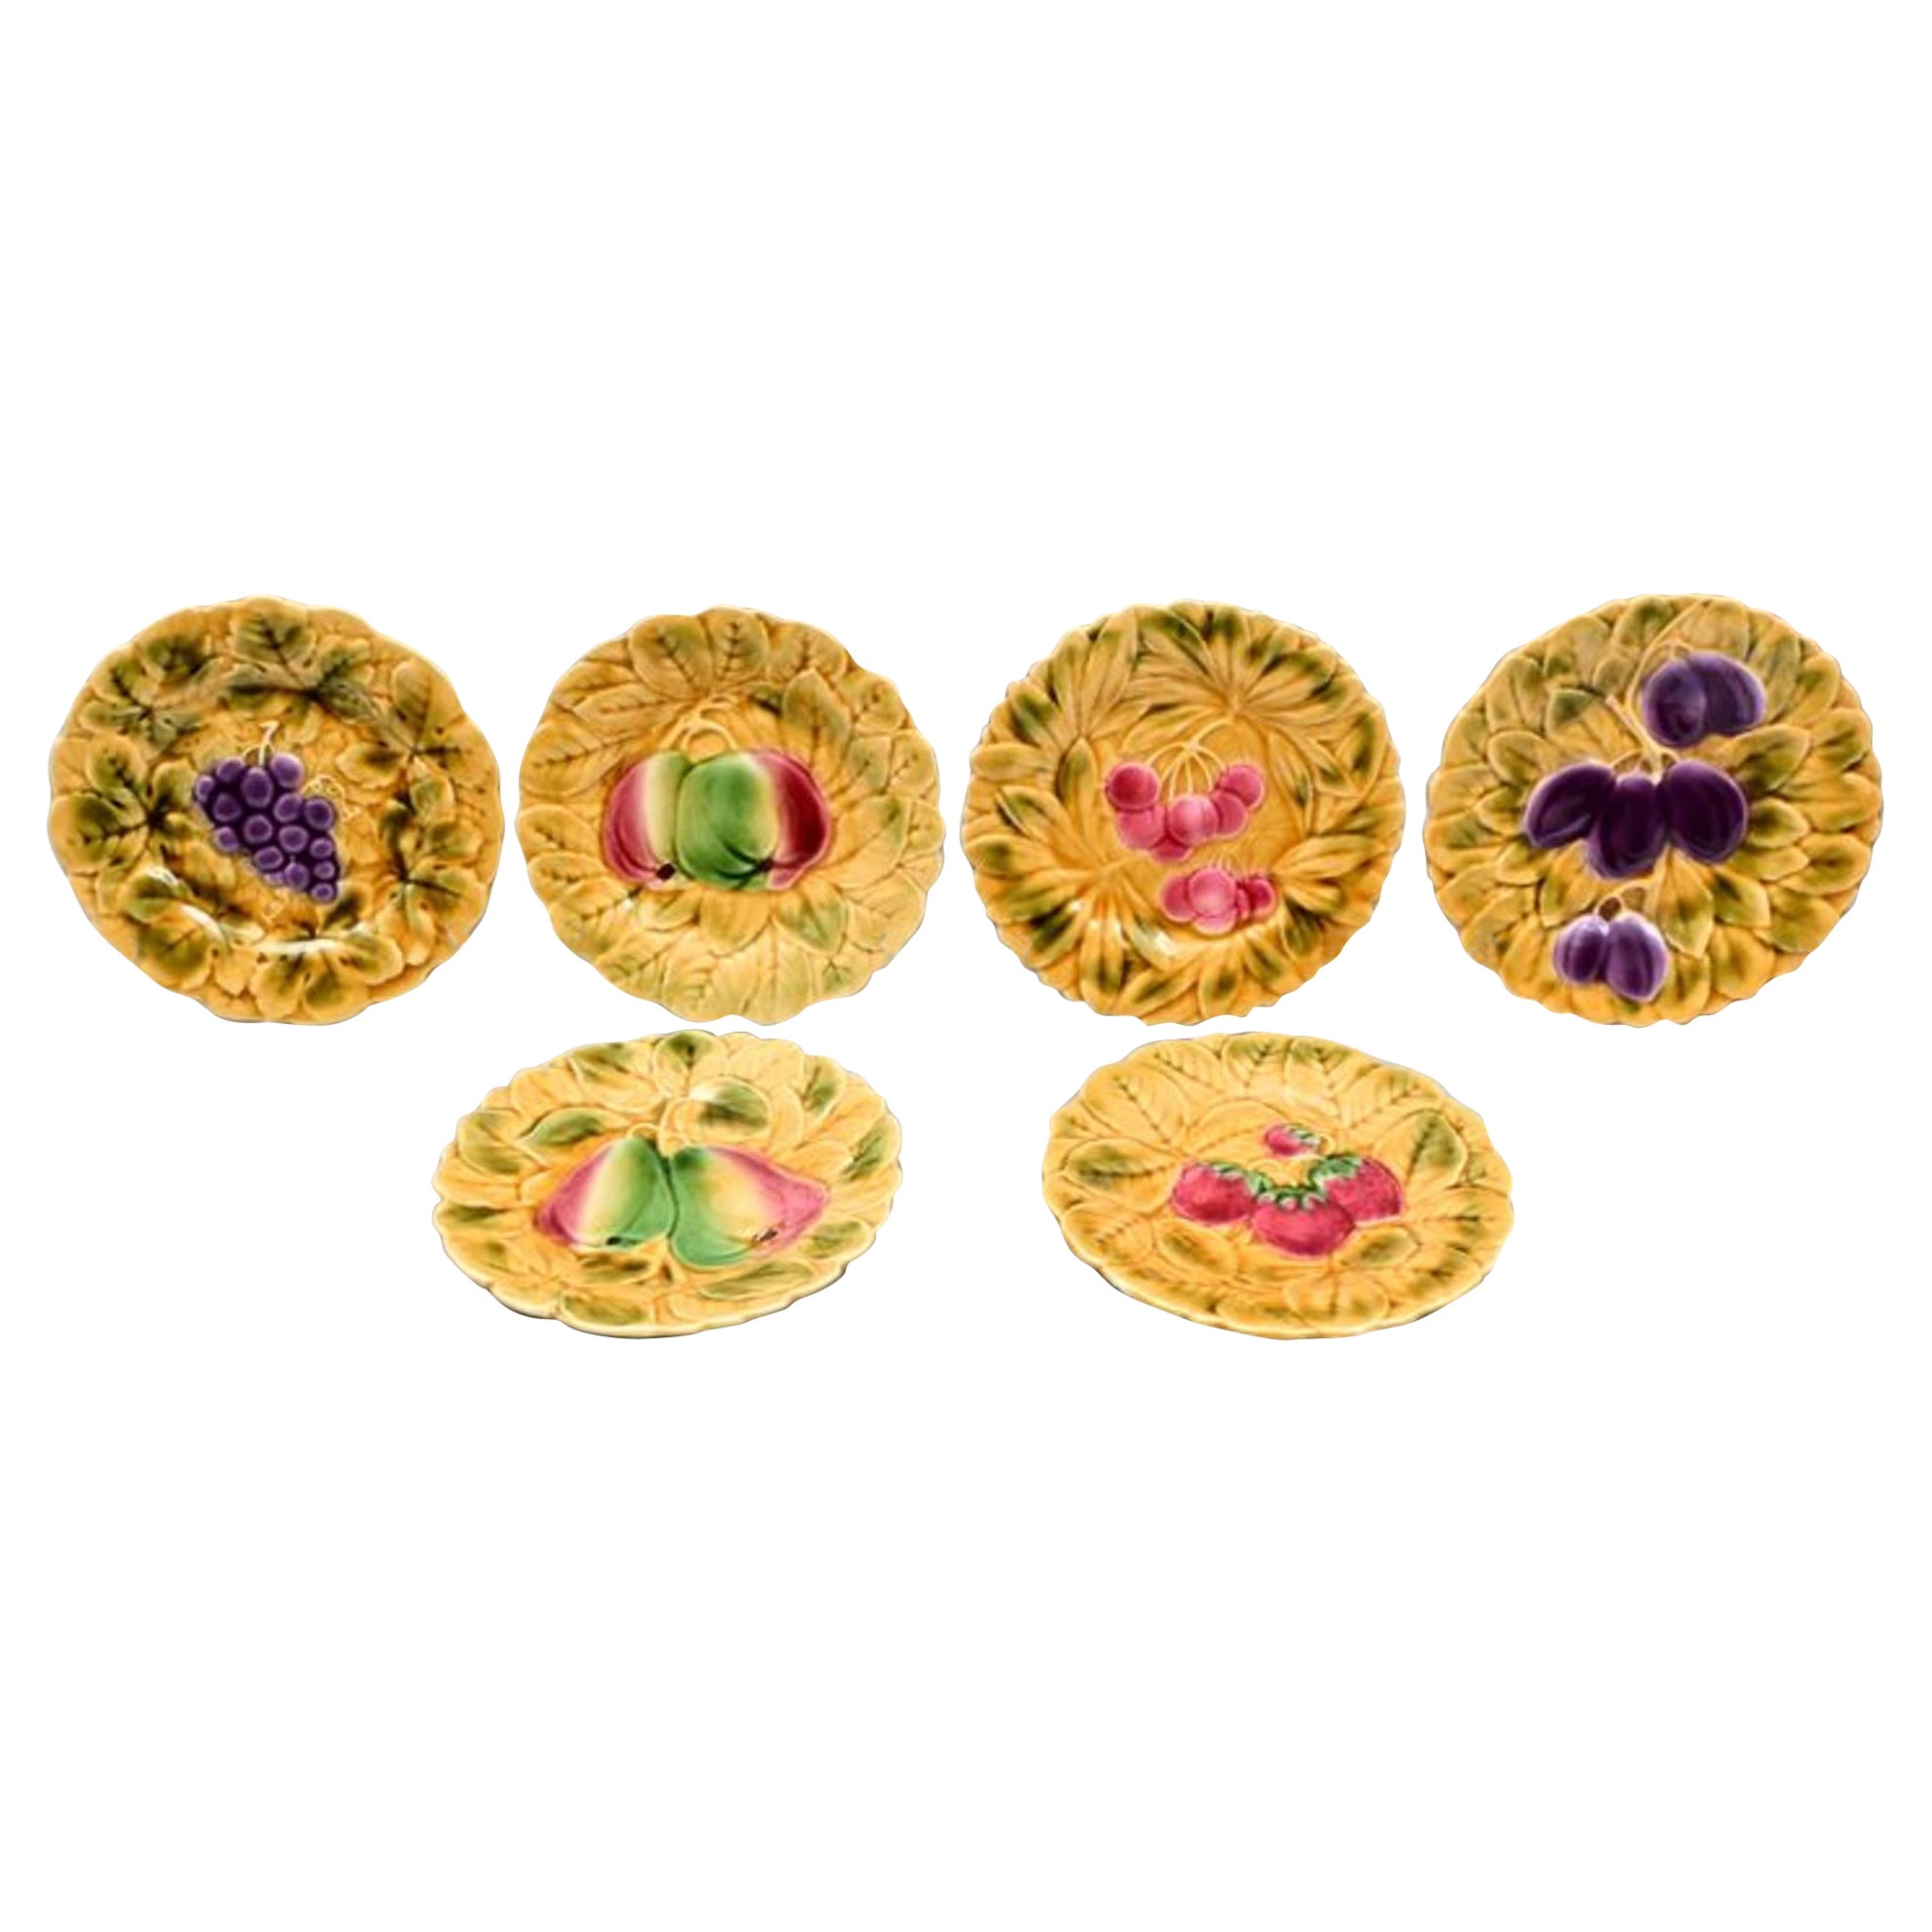 Six Majolica Plates with Fruit Decor, Sarreguemines, France, Early 20th Century